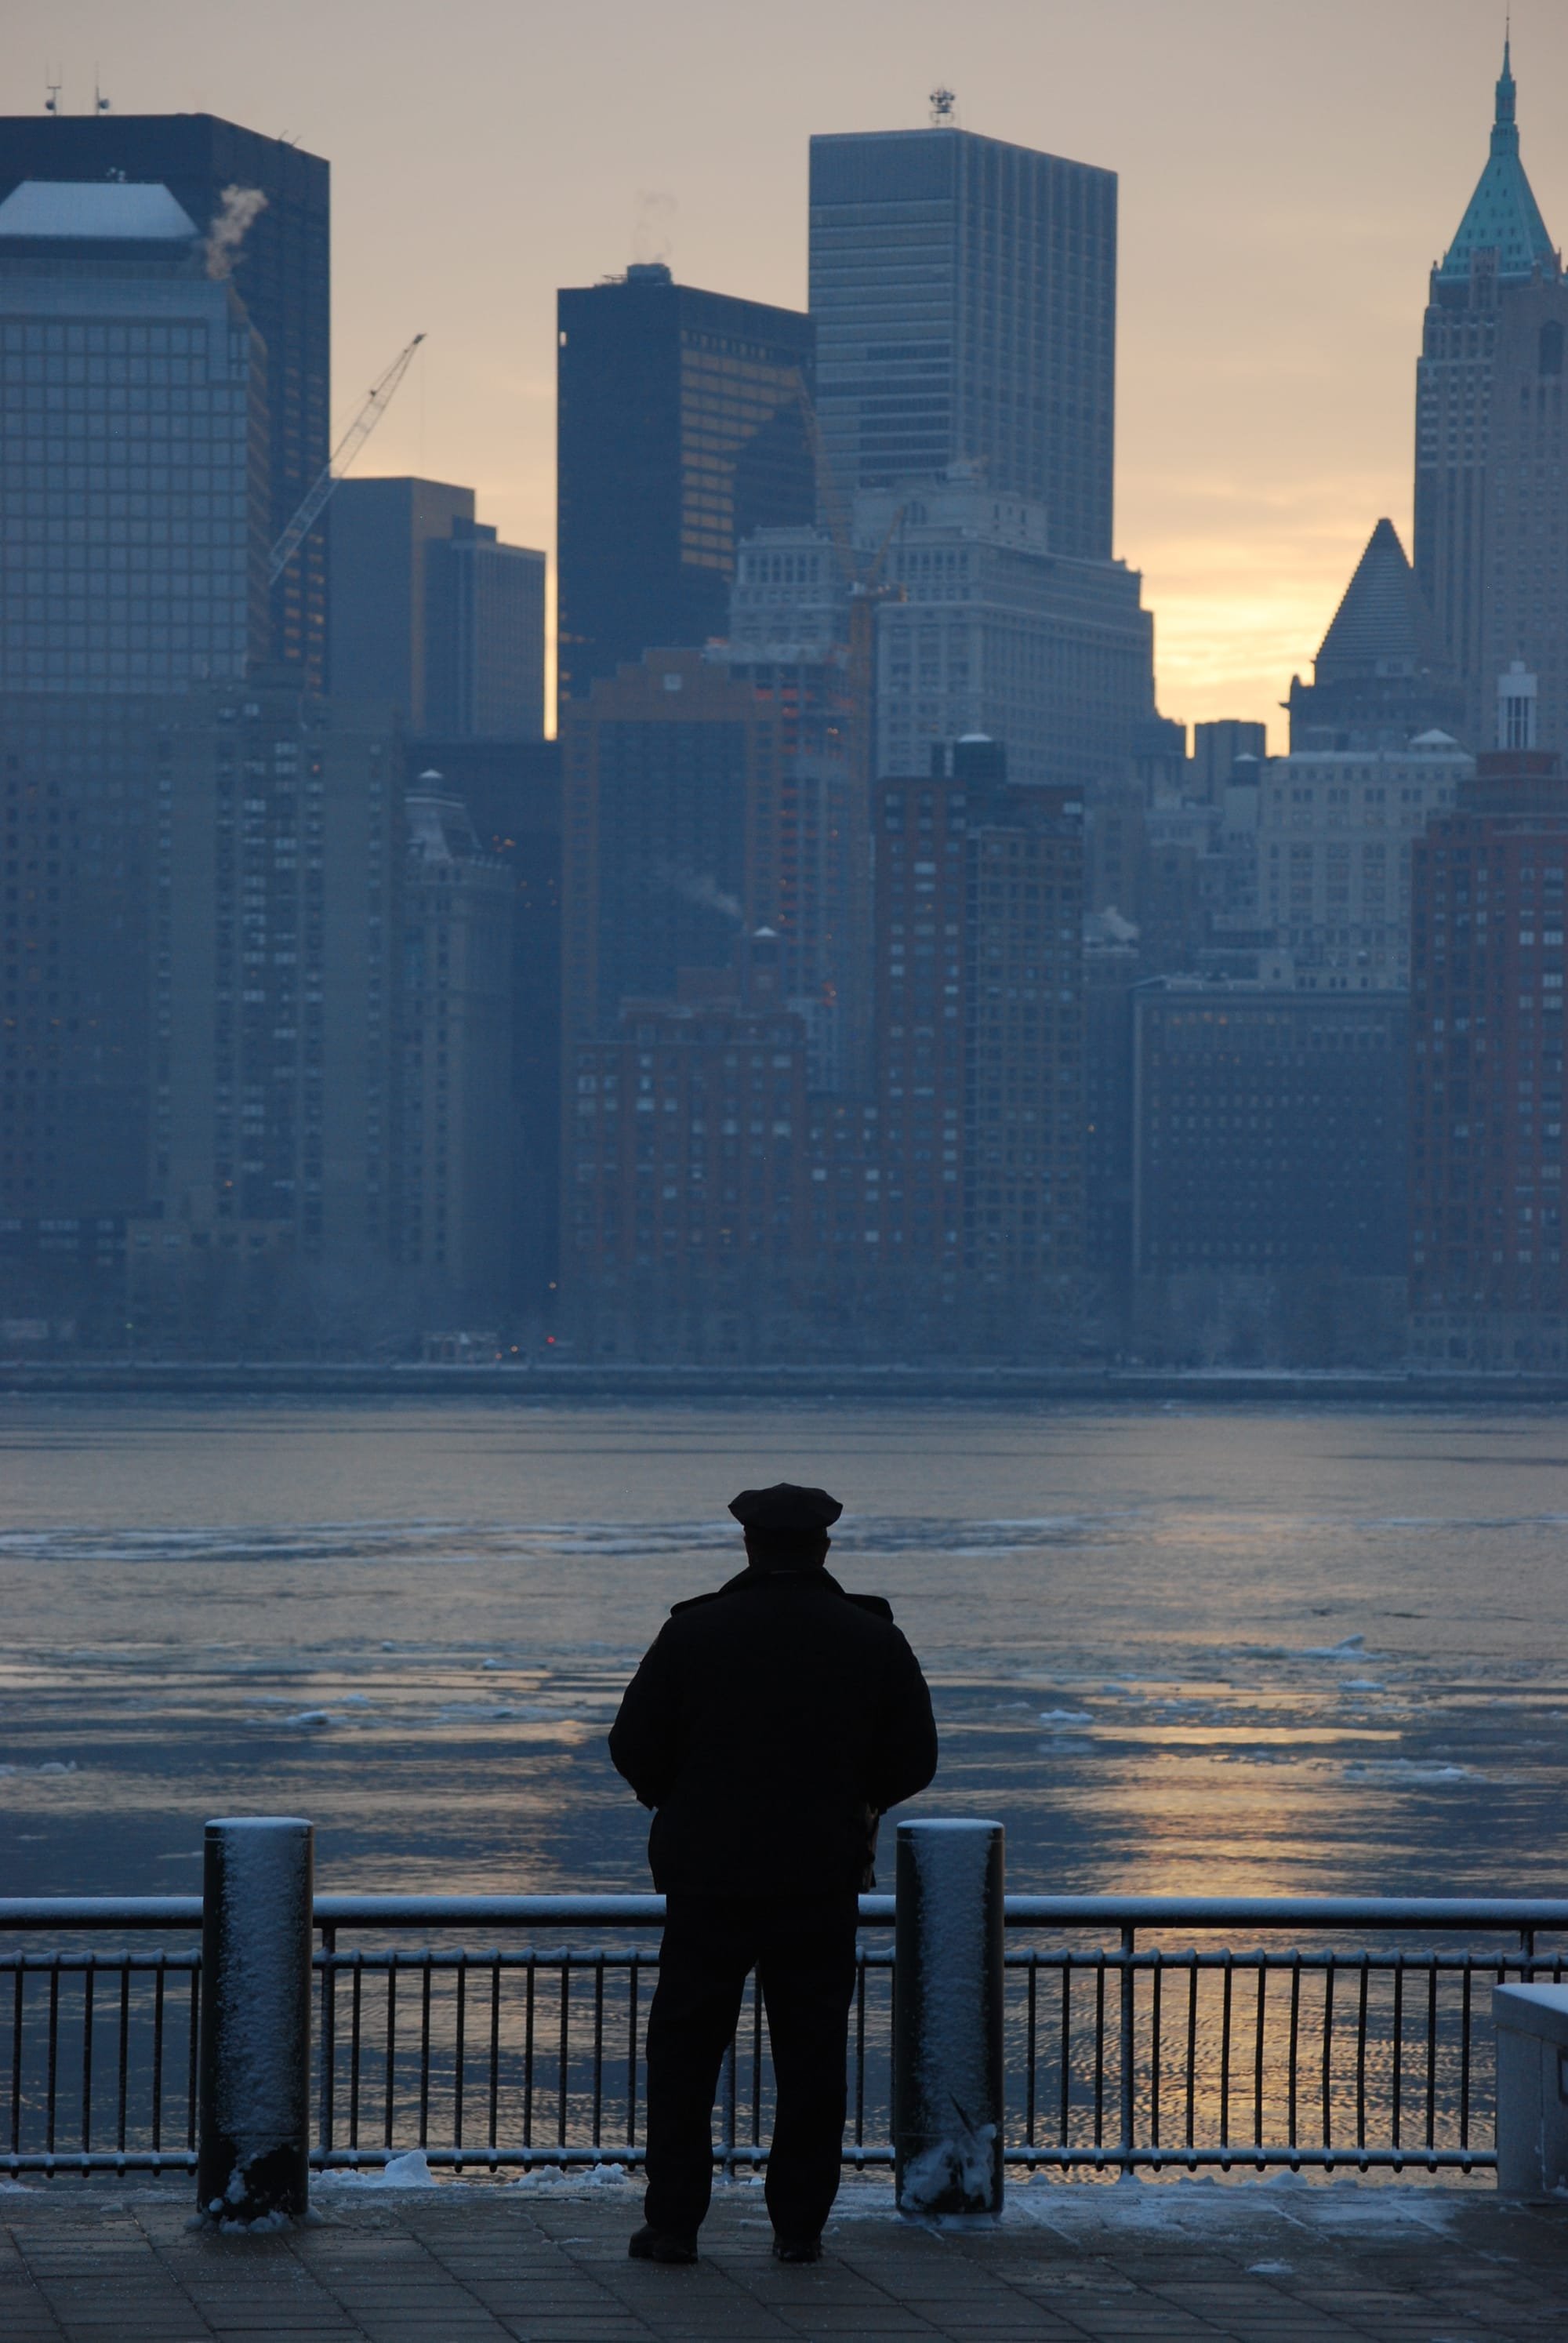 227. Officer looking at lower Manhattan a cold Winterday